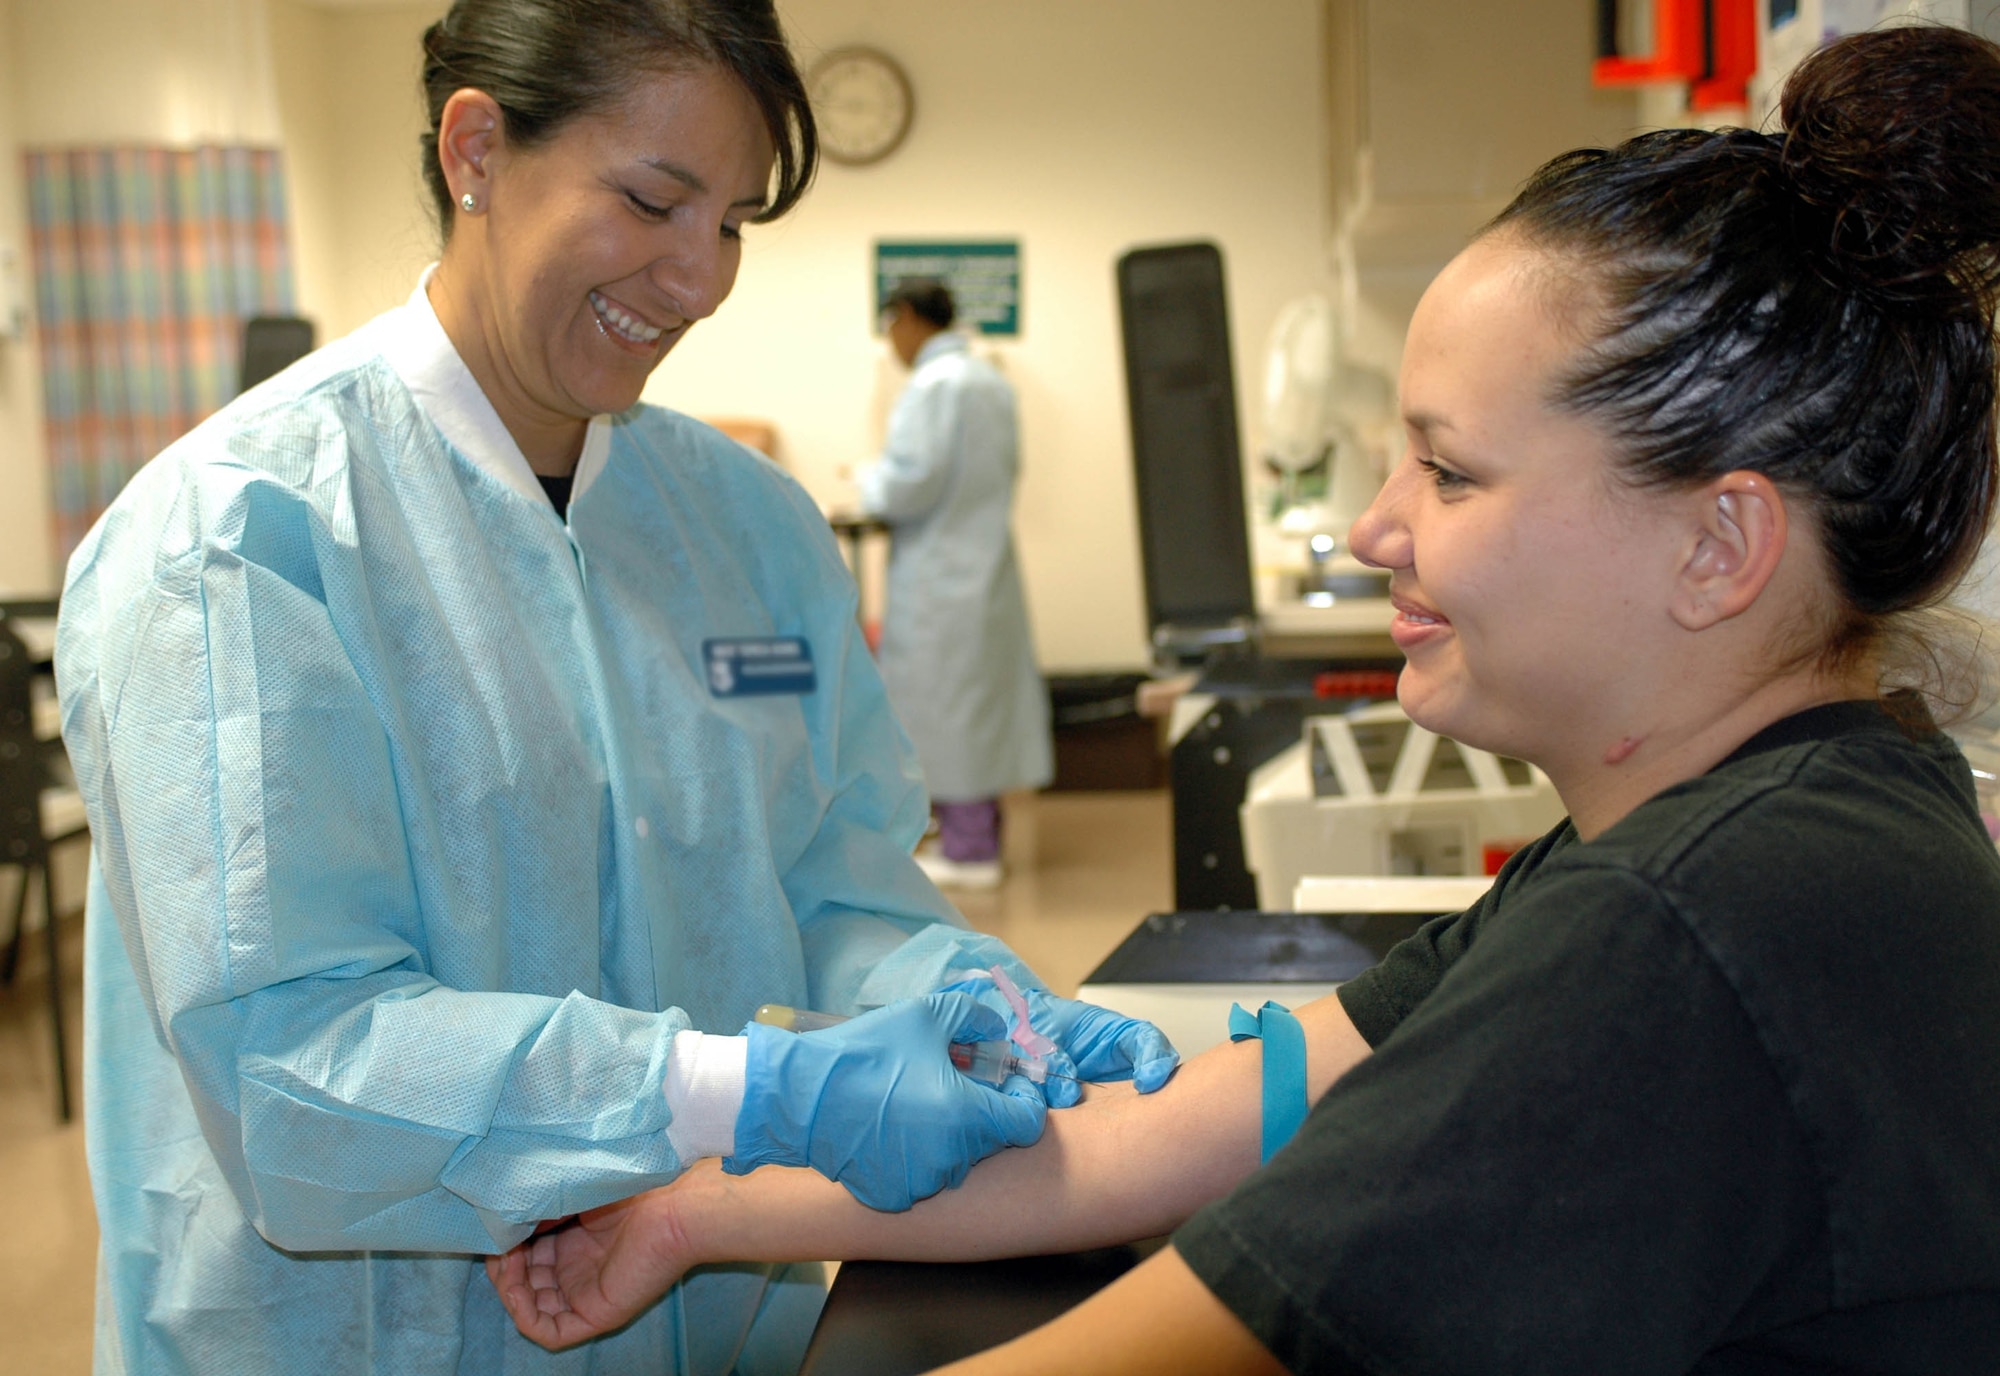 Master Sgt. Teresa Gomez, (left), 60th Diagnostics and Therapeutics Squadron NCOIC of Laboratory Services, prepares to draw blood from a patient. Sergeant Gomez was selected as Warrior of the Week. (U.S. Air Force photo/Staff Sgt. Candy Knight)